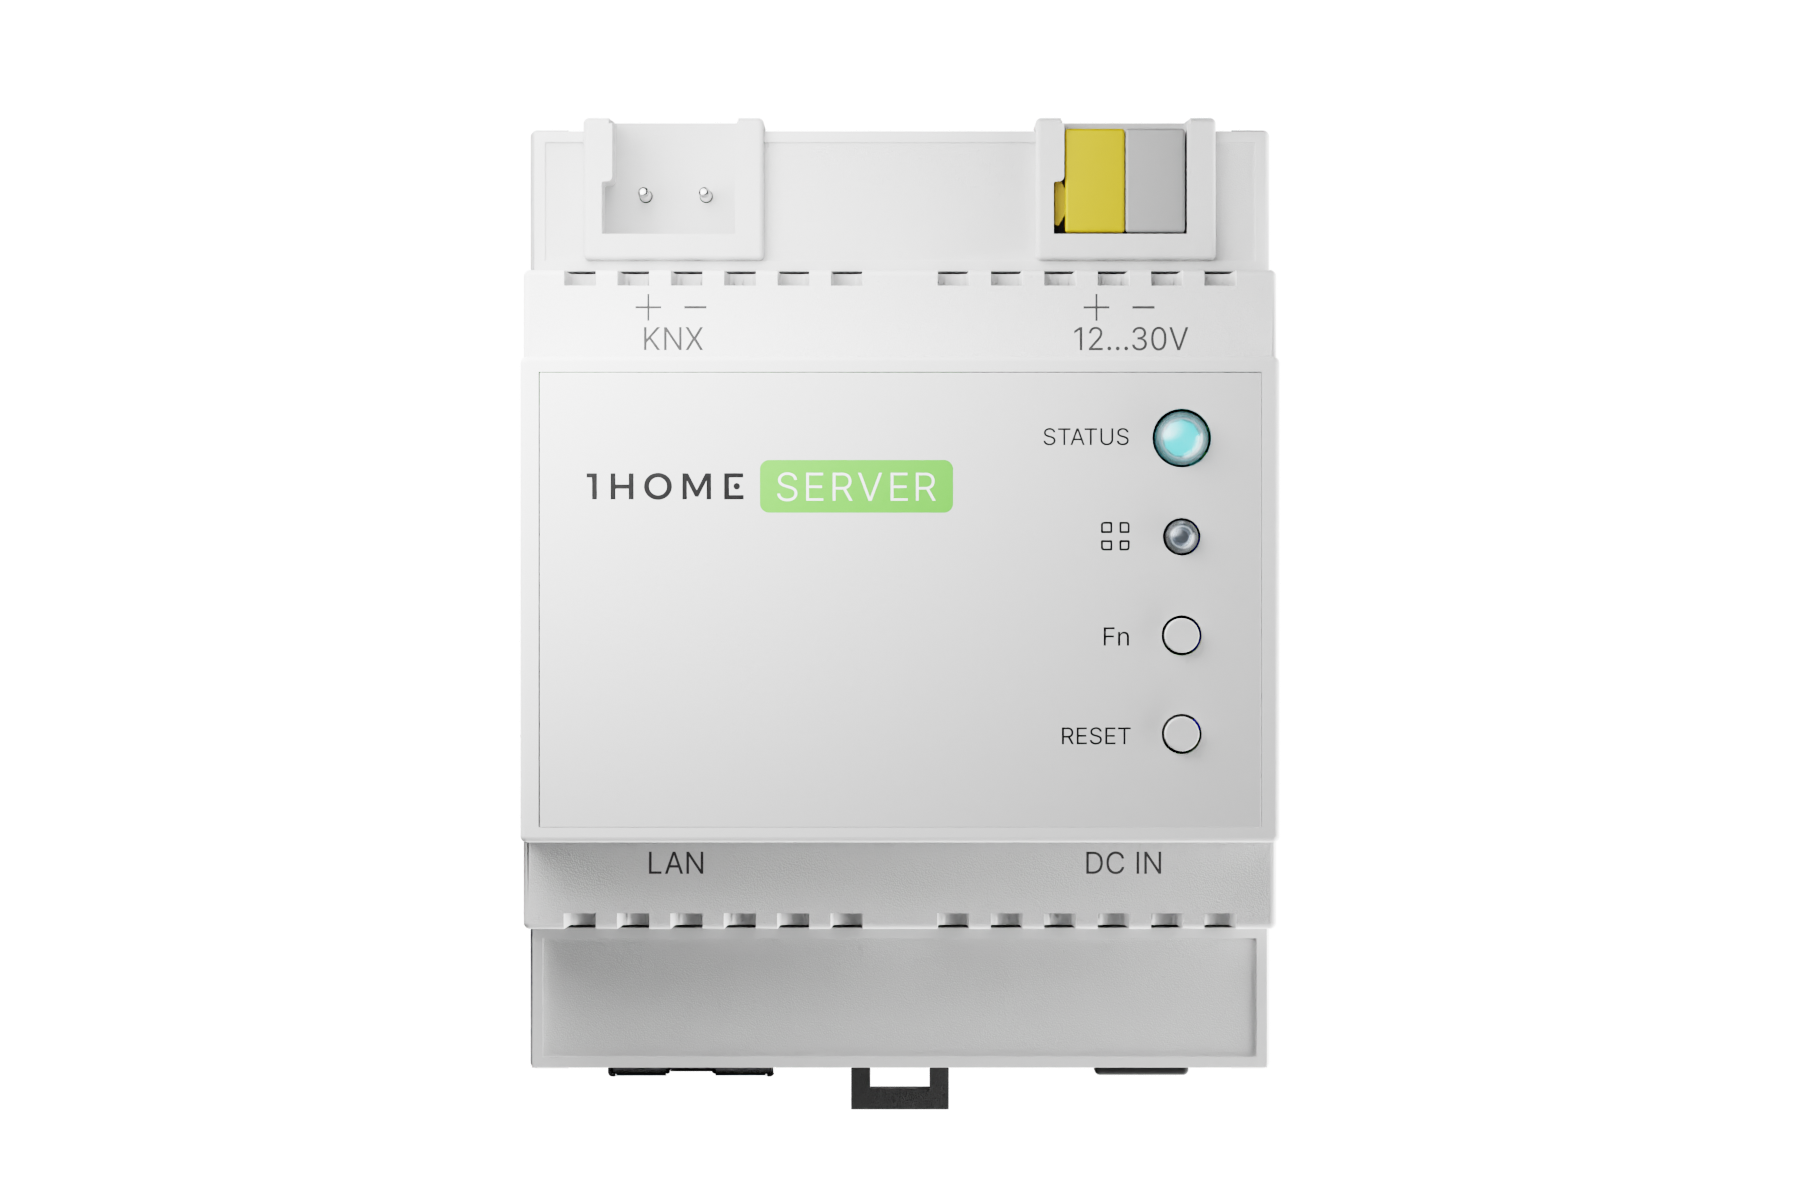 1Home Server for KNX. Full integration with Apple Home, Google Home, Samsung SmartThings, voice interfaces and Matter